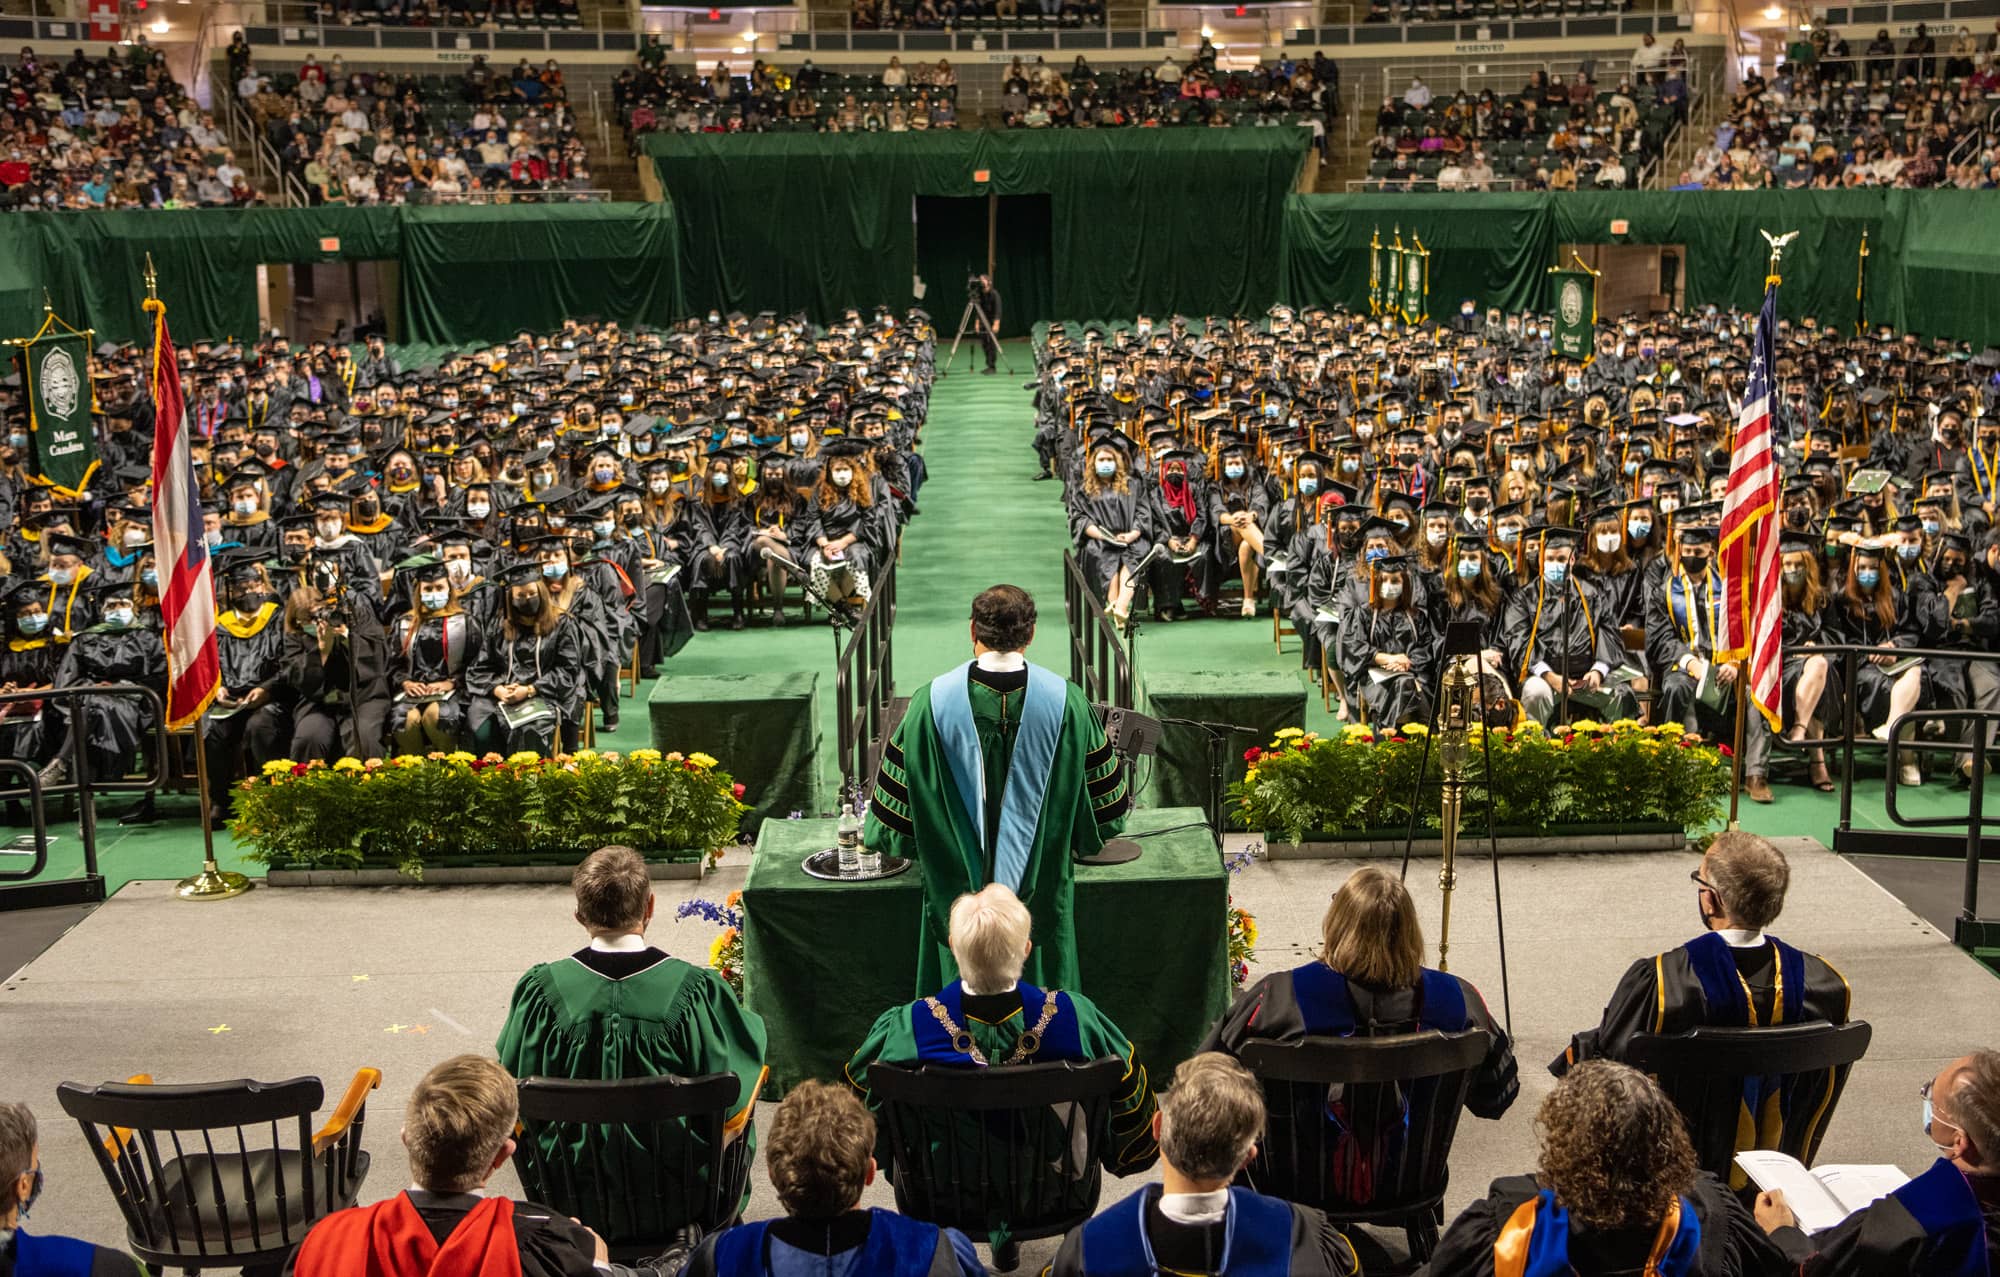 Volunteers needed for Fall Commencement